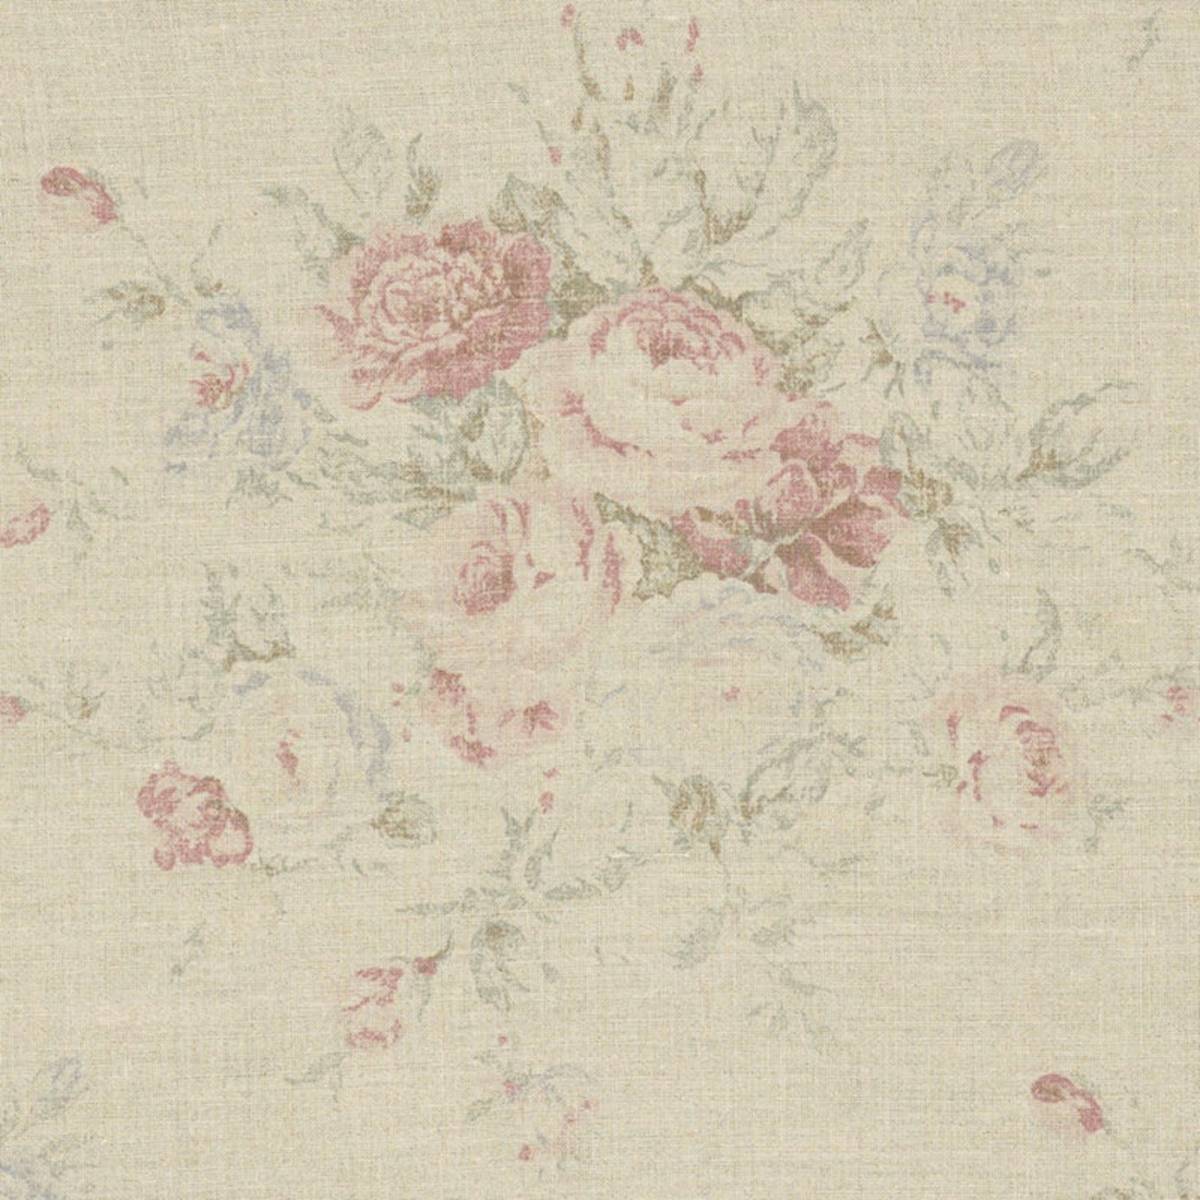 Wainscott Floral Fabric - Vintage Rose (FRL118/02) - Ralph Lauren Signature  Country and Coast Fabrics Collection